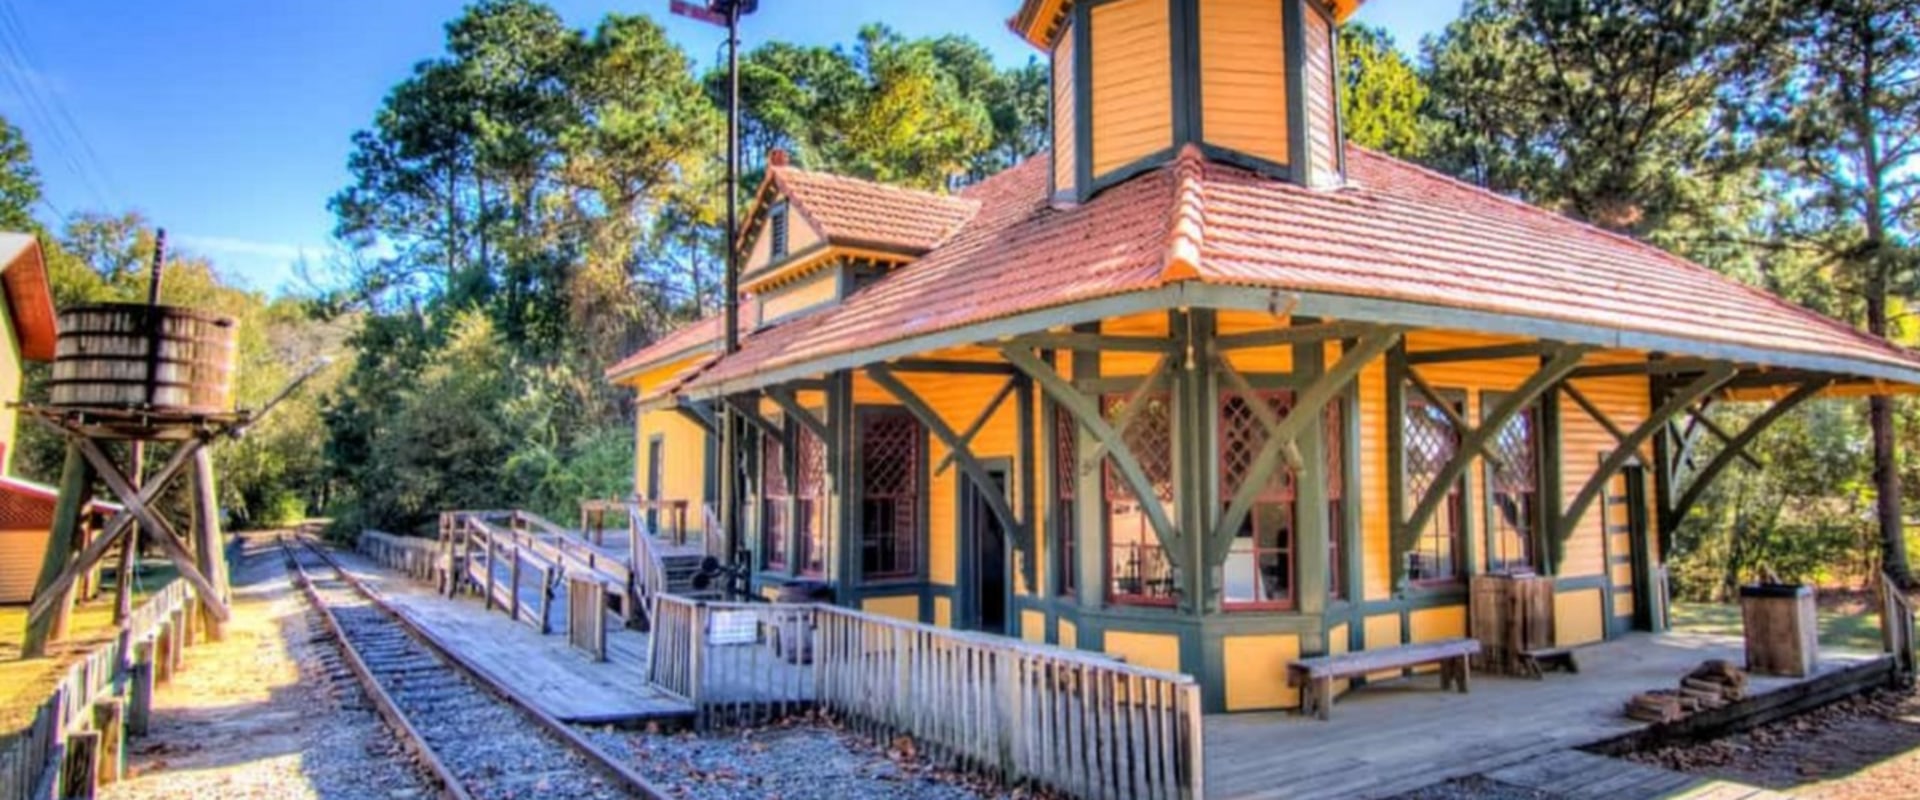 Exploring the Best Souvenirs and Gifts at Tourist Attractions in Hapeville, GA